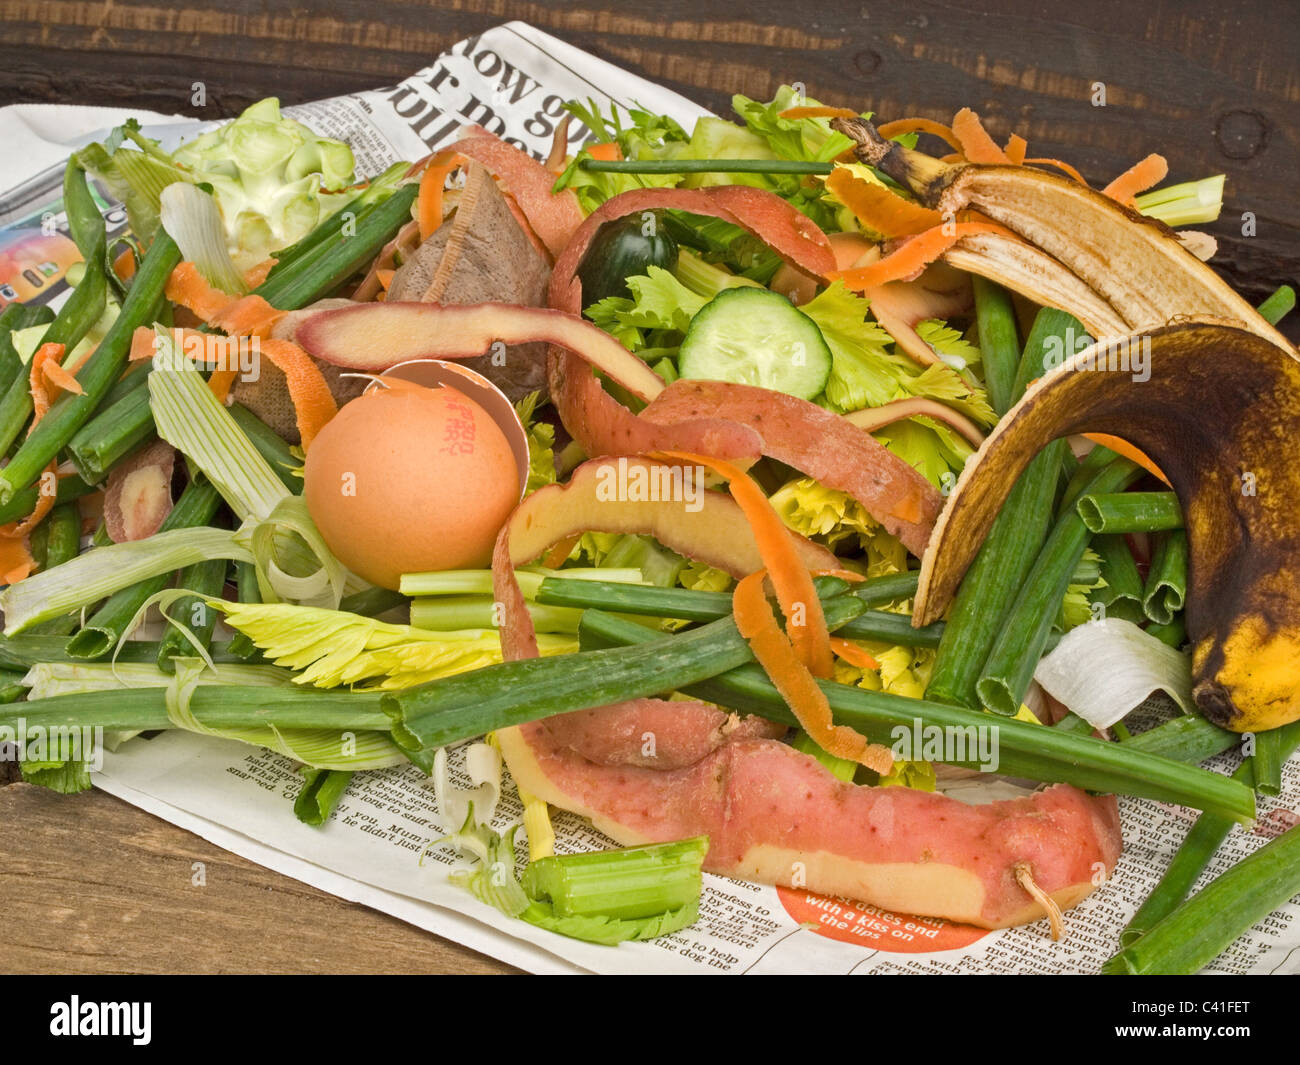 kitchen waste vegetable scraps recycling composting Stock Photo